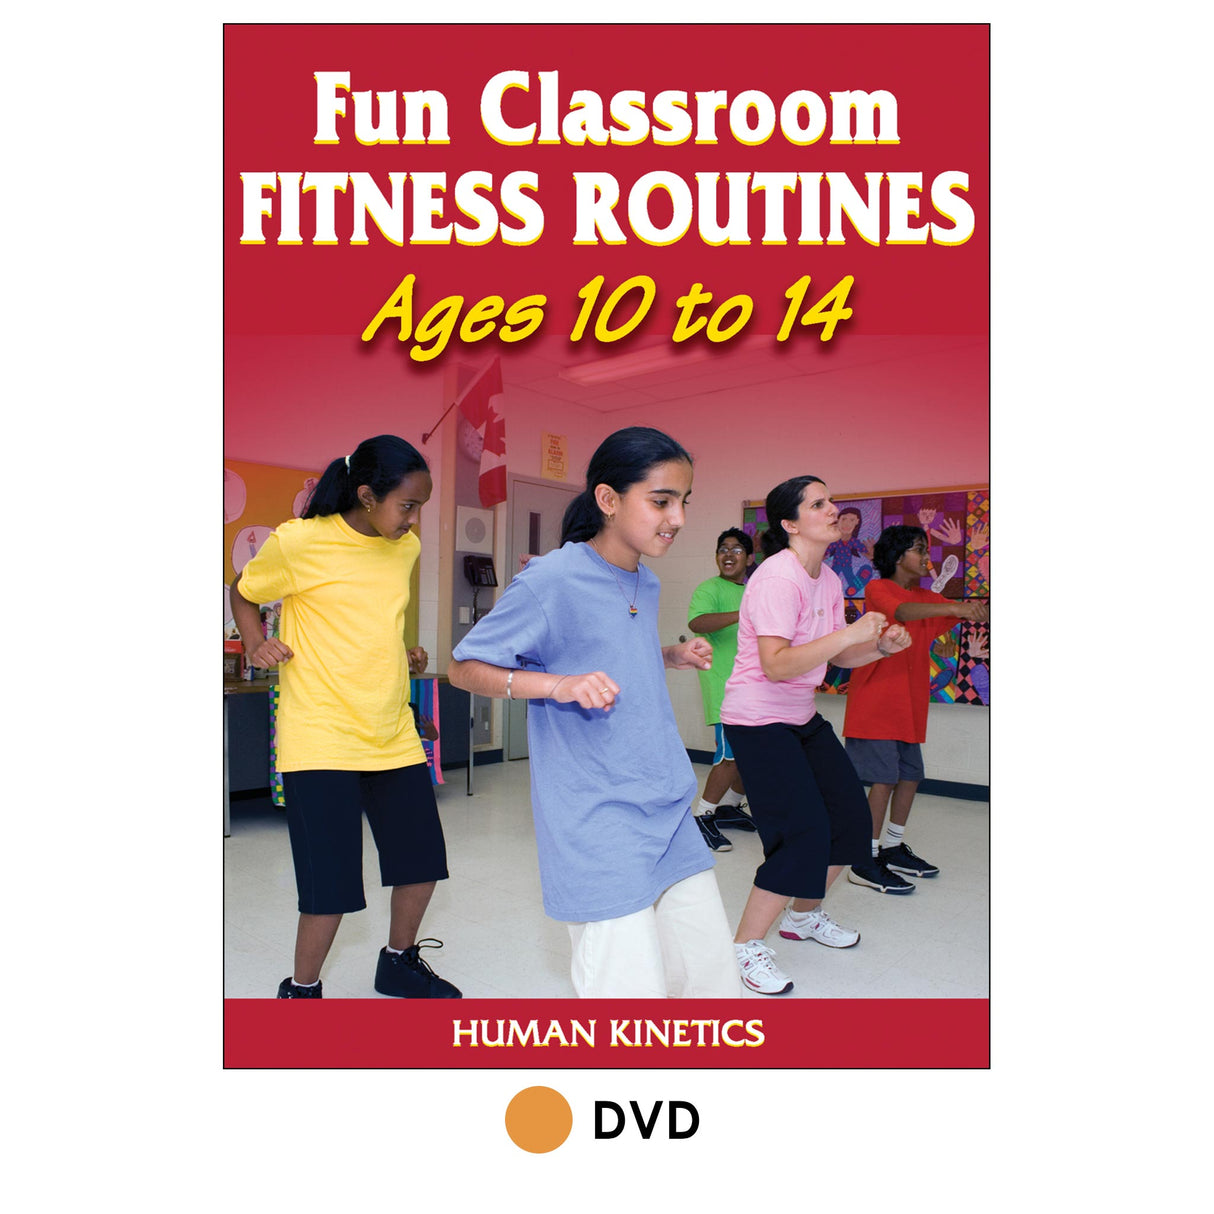 Fun Classroom Fitness Routines Ages 10-14 DVD